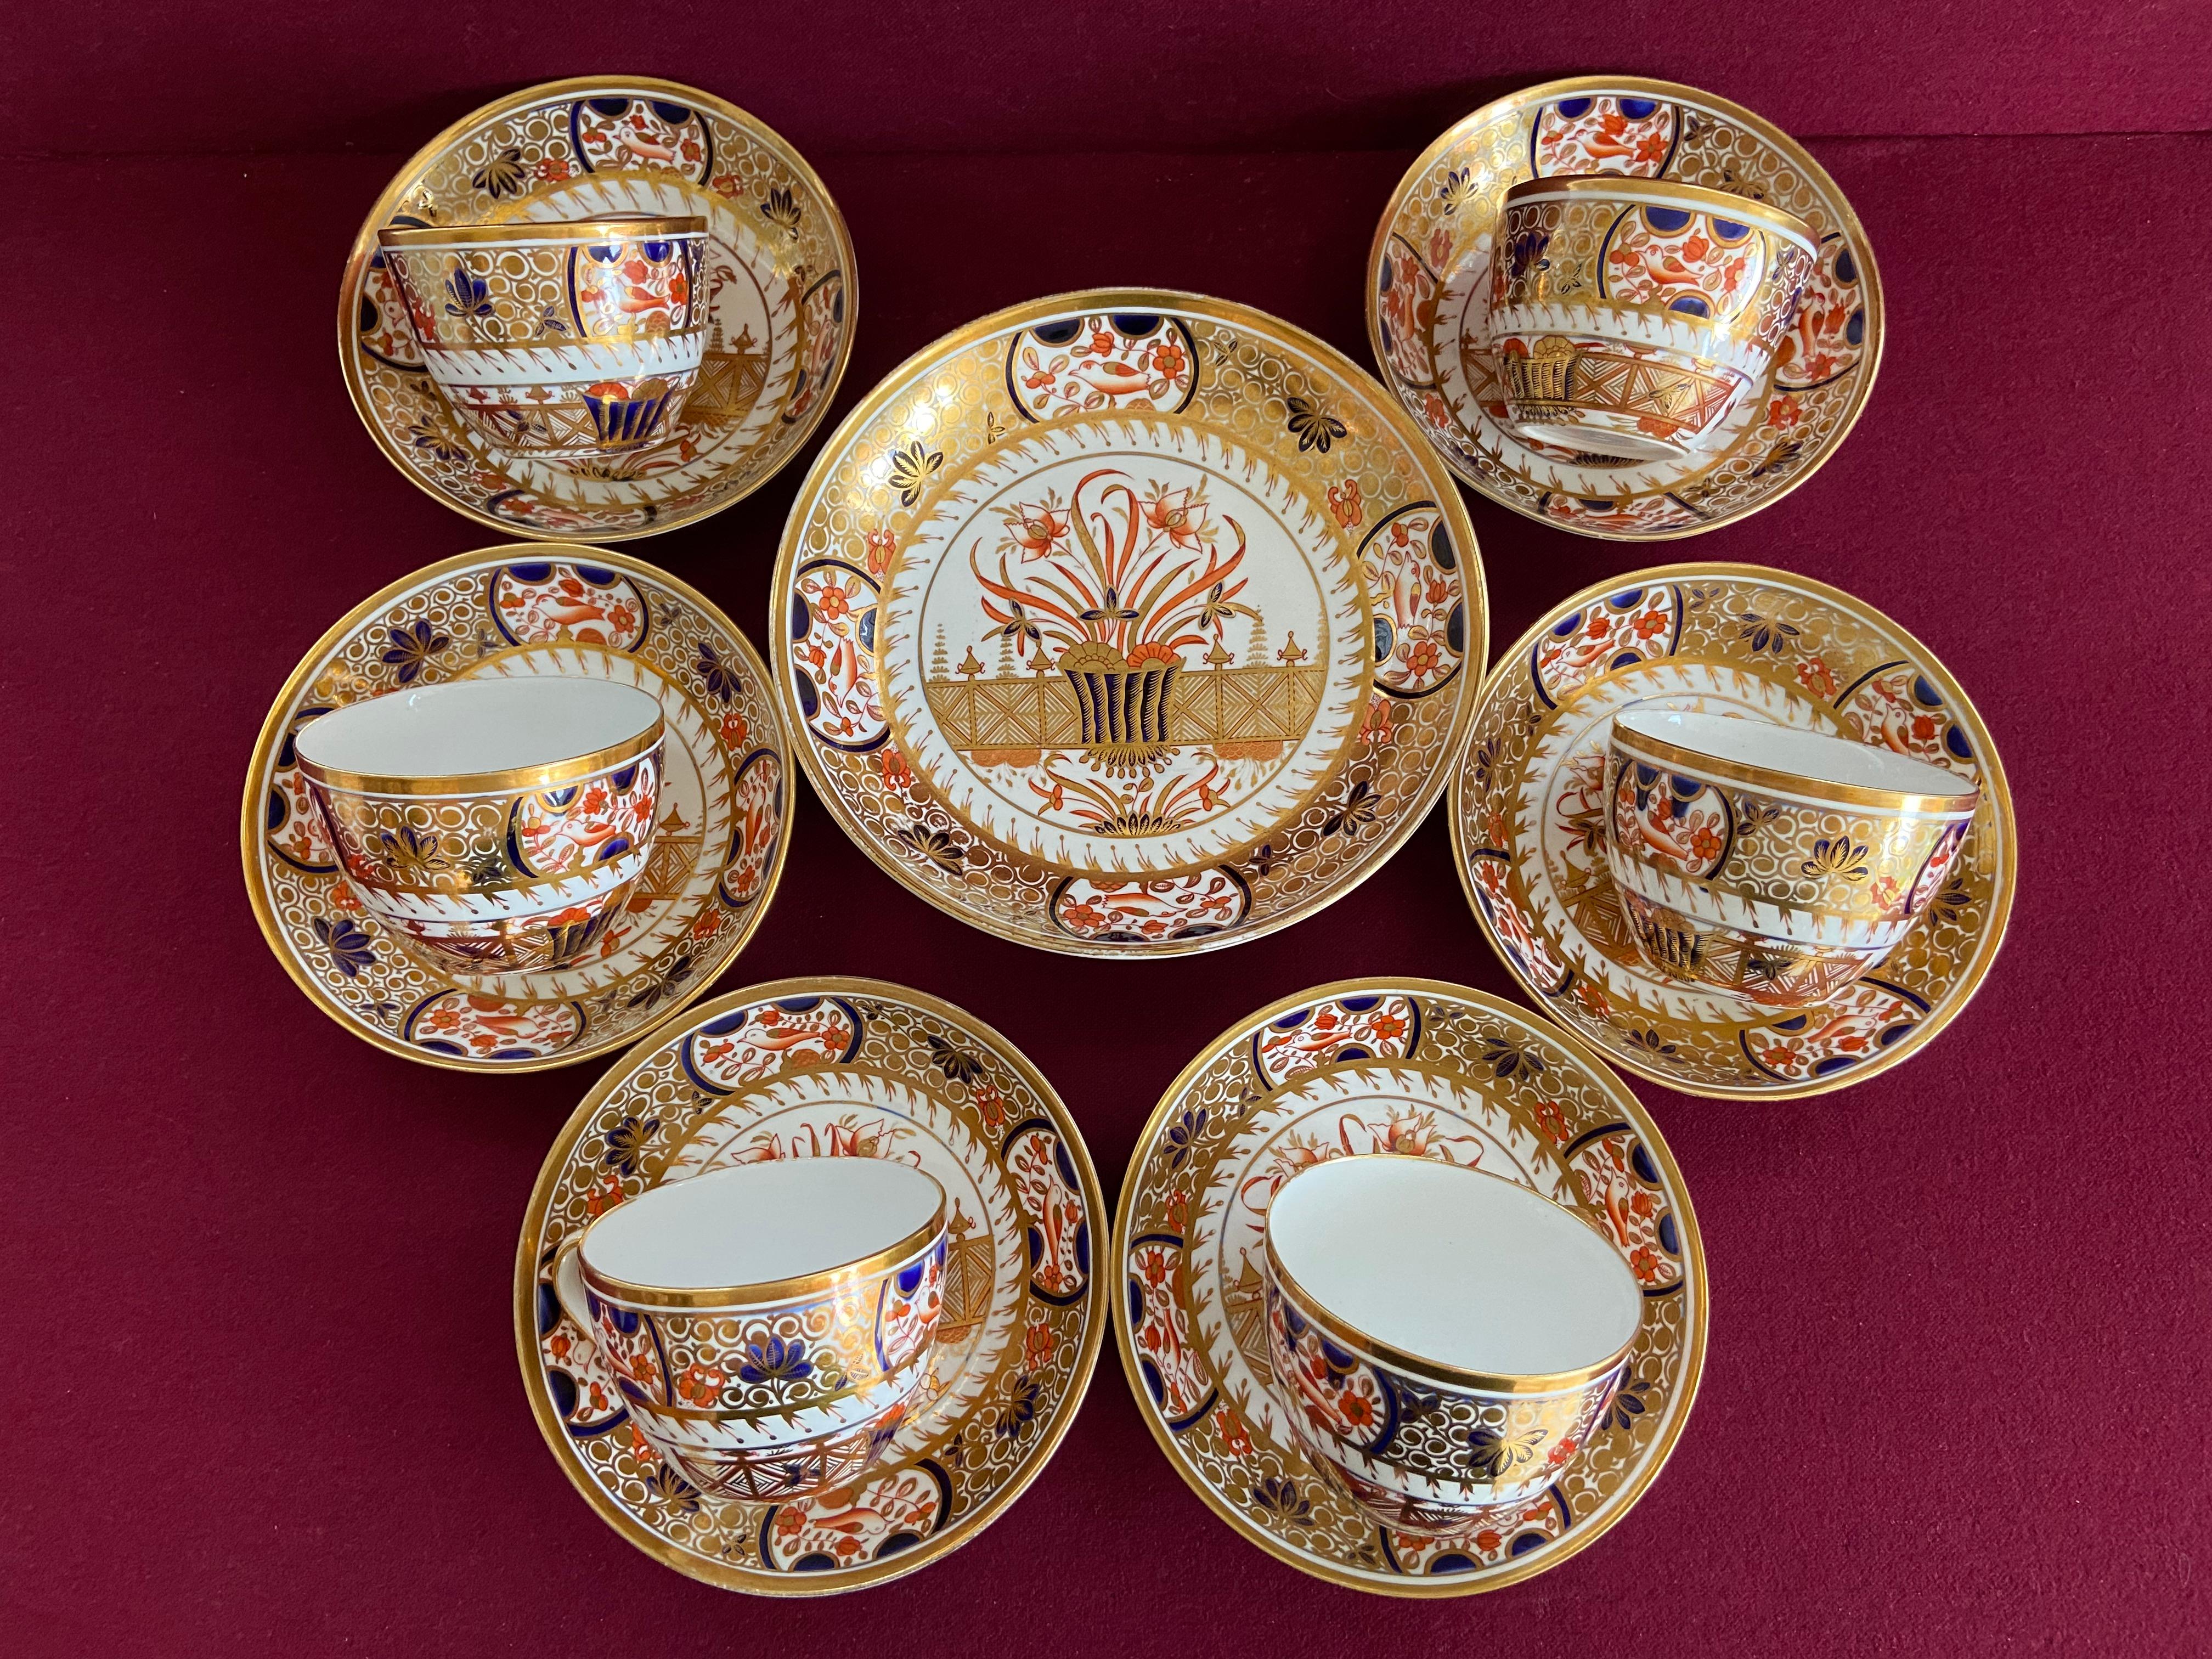 A Spode Porcelain Bute Shape part Tea set c.1805-1810 . Richly decorated with an Imari style pattern, marked Spode in red and pattern 1495 on each piece. Consisting of 6 tea cups and saucers and 1 saucer dish.

Condition: A small amount of surace